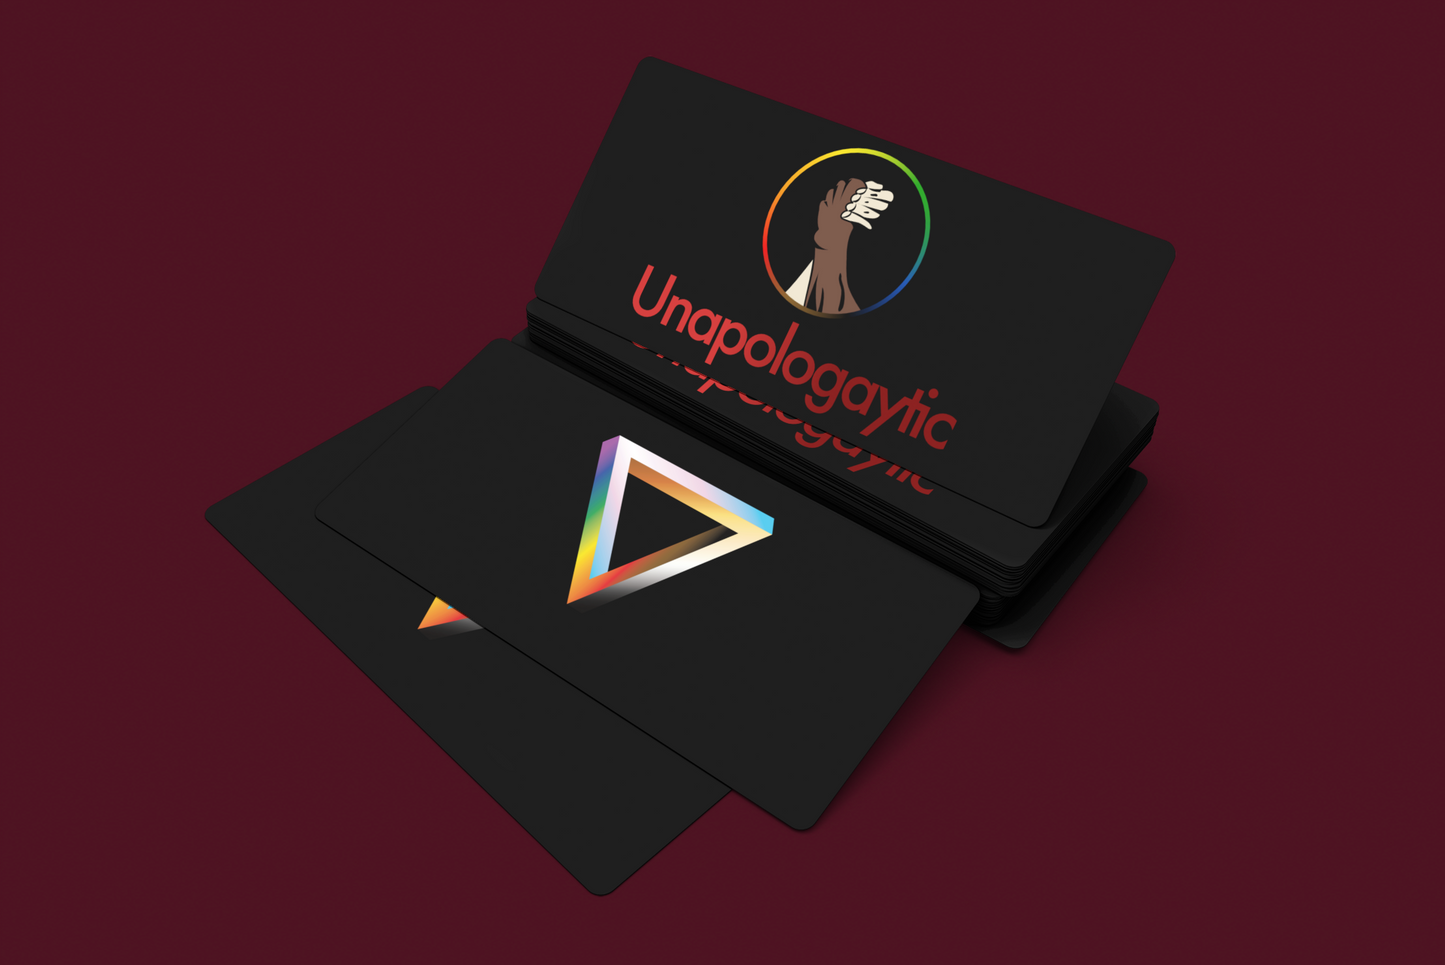 Unapologaytic gift cards ranging from £5 to £40. Available instantly exclusively on unapologaytic.com. Personalised gift messages can also be added to any order at the time of purchase.